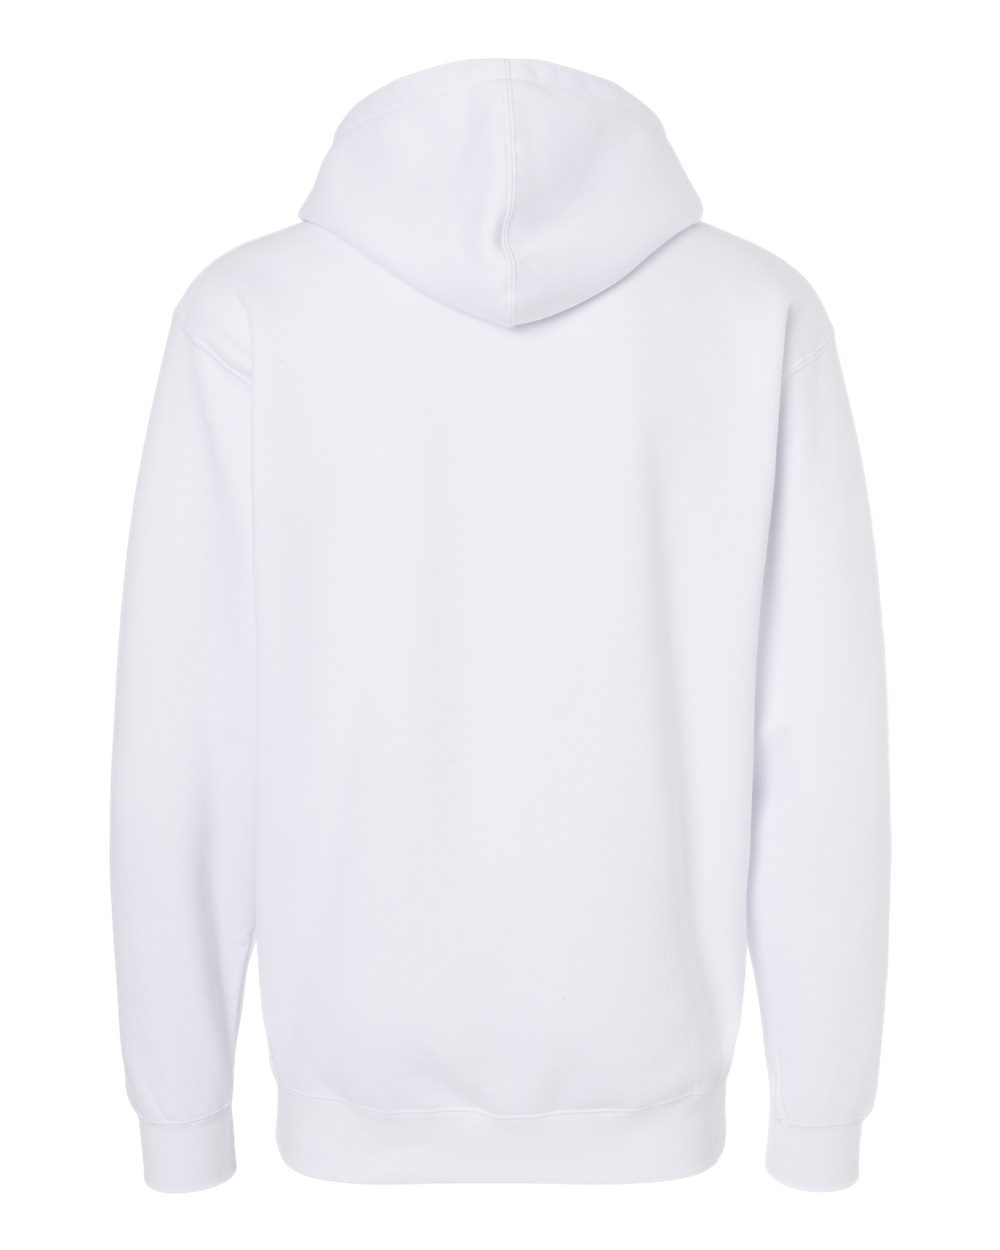 IND4000 Heavyweight Hooded Pullover Sweatshirts  Collegiate Colors -  Independent Trading Company